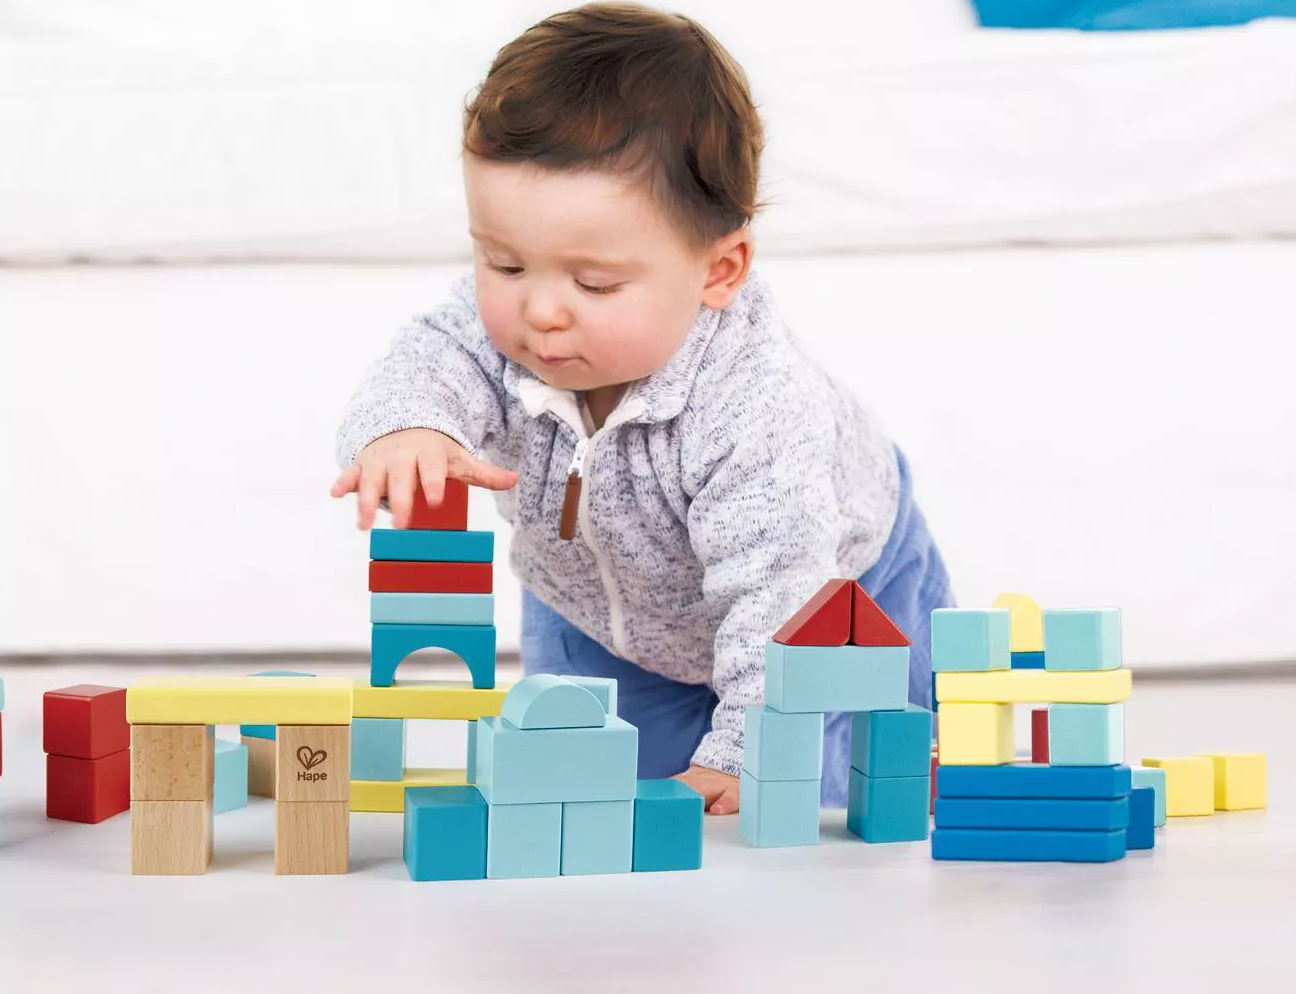 Child model playing with colorful building blocks